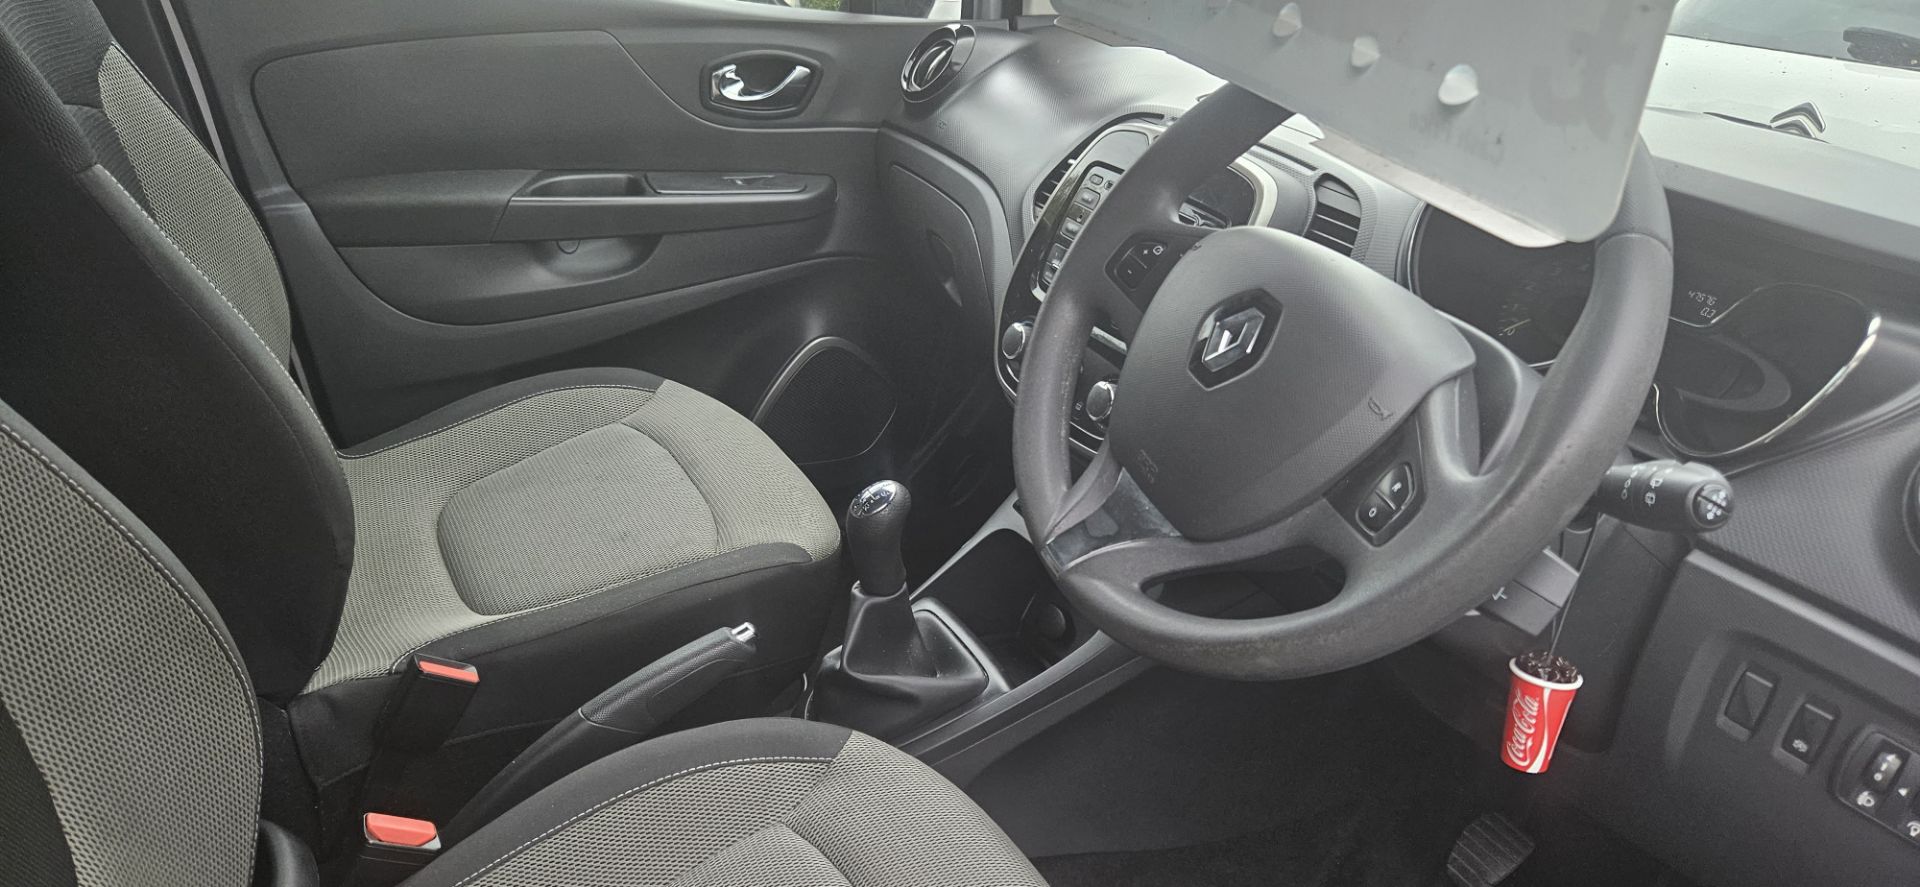 2016 RENAULT CLIO AUTOMATIC - Image 7 of 7